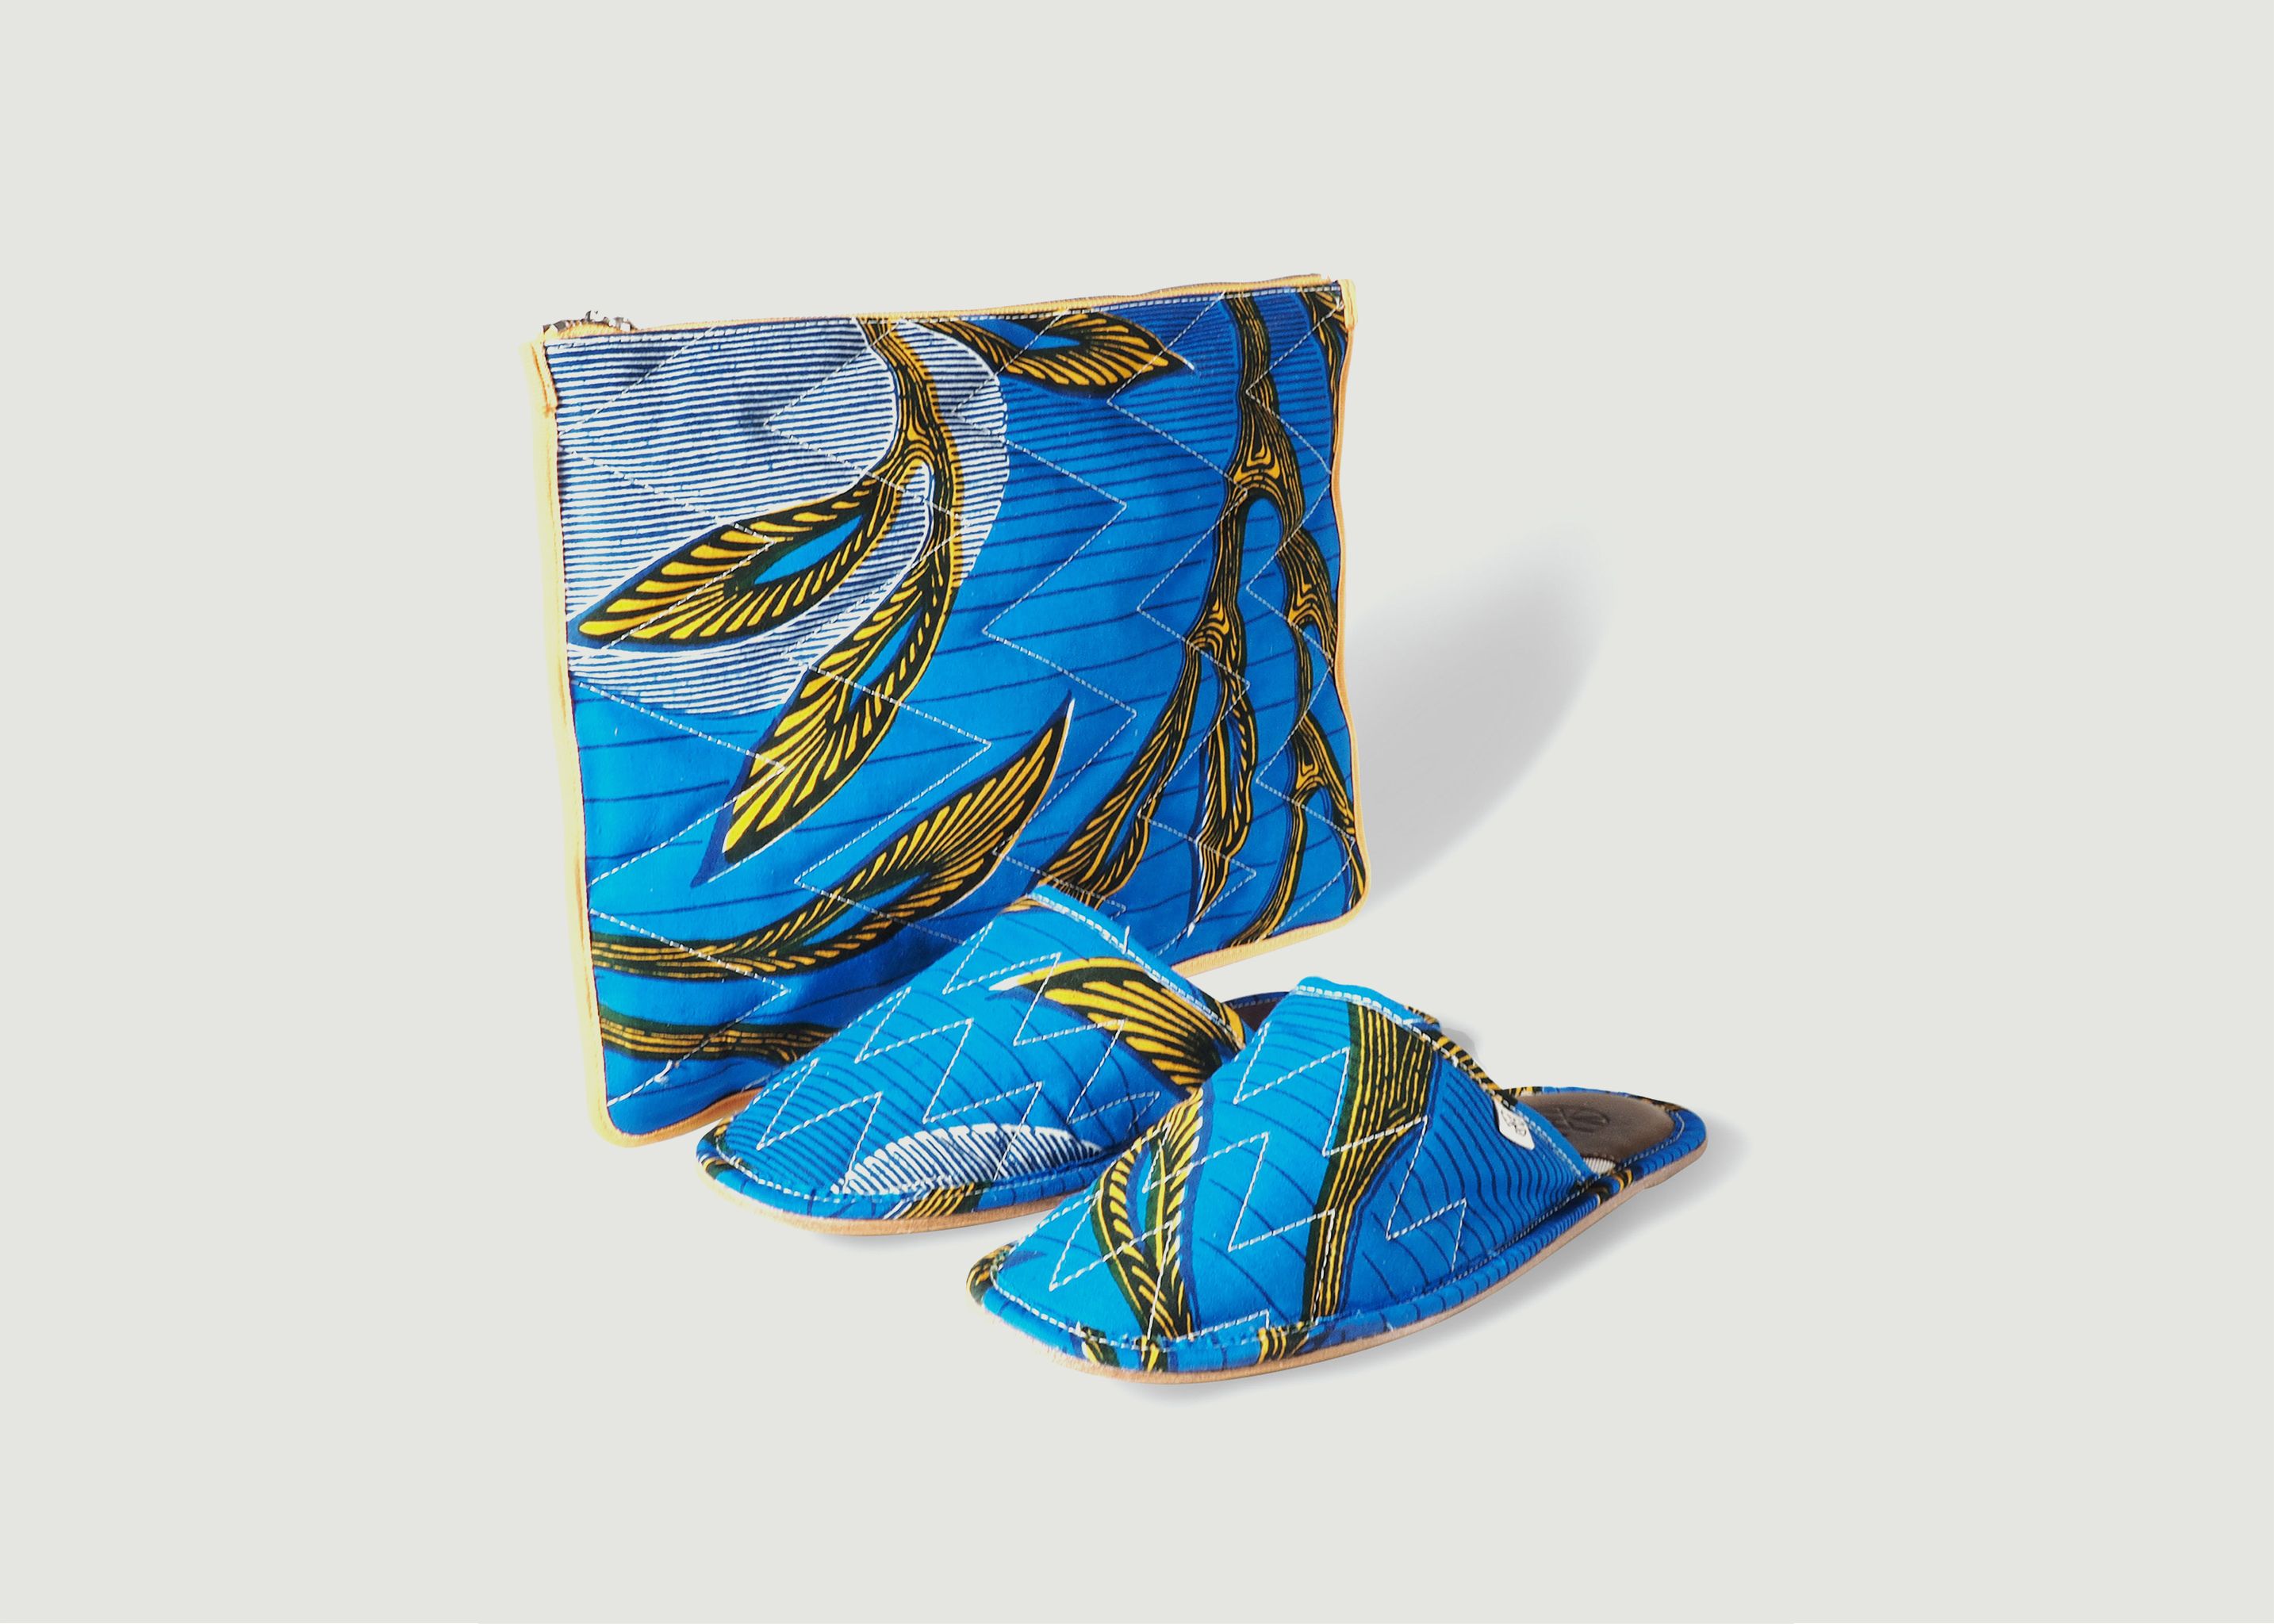 Chaussons Socco  - Panafrica